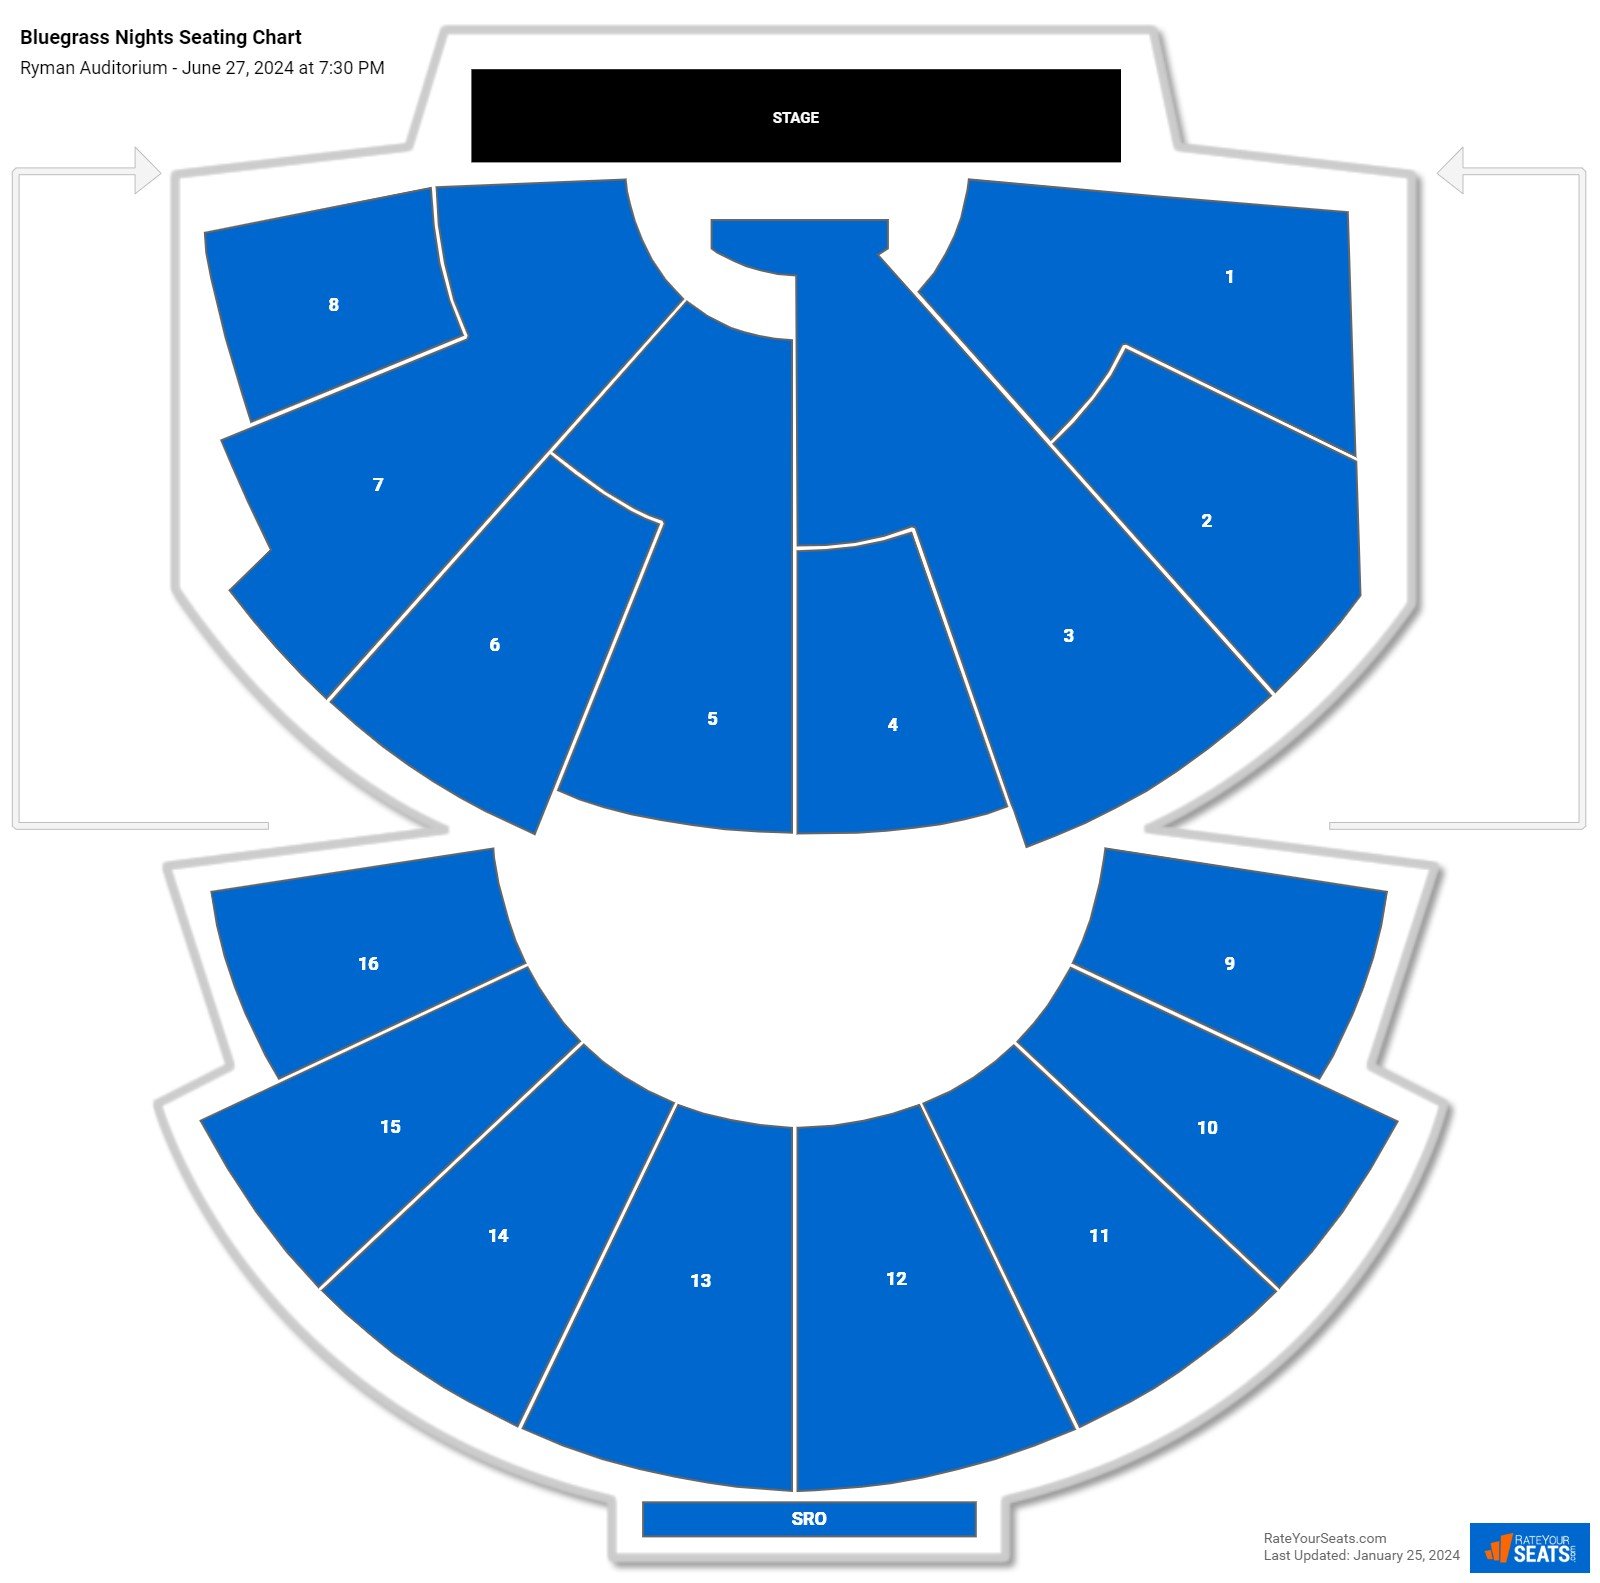 Bluegrass Nights - Earls of Leicester seating chart Ryman Auditorium